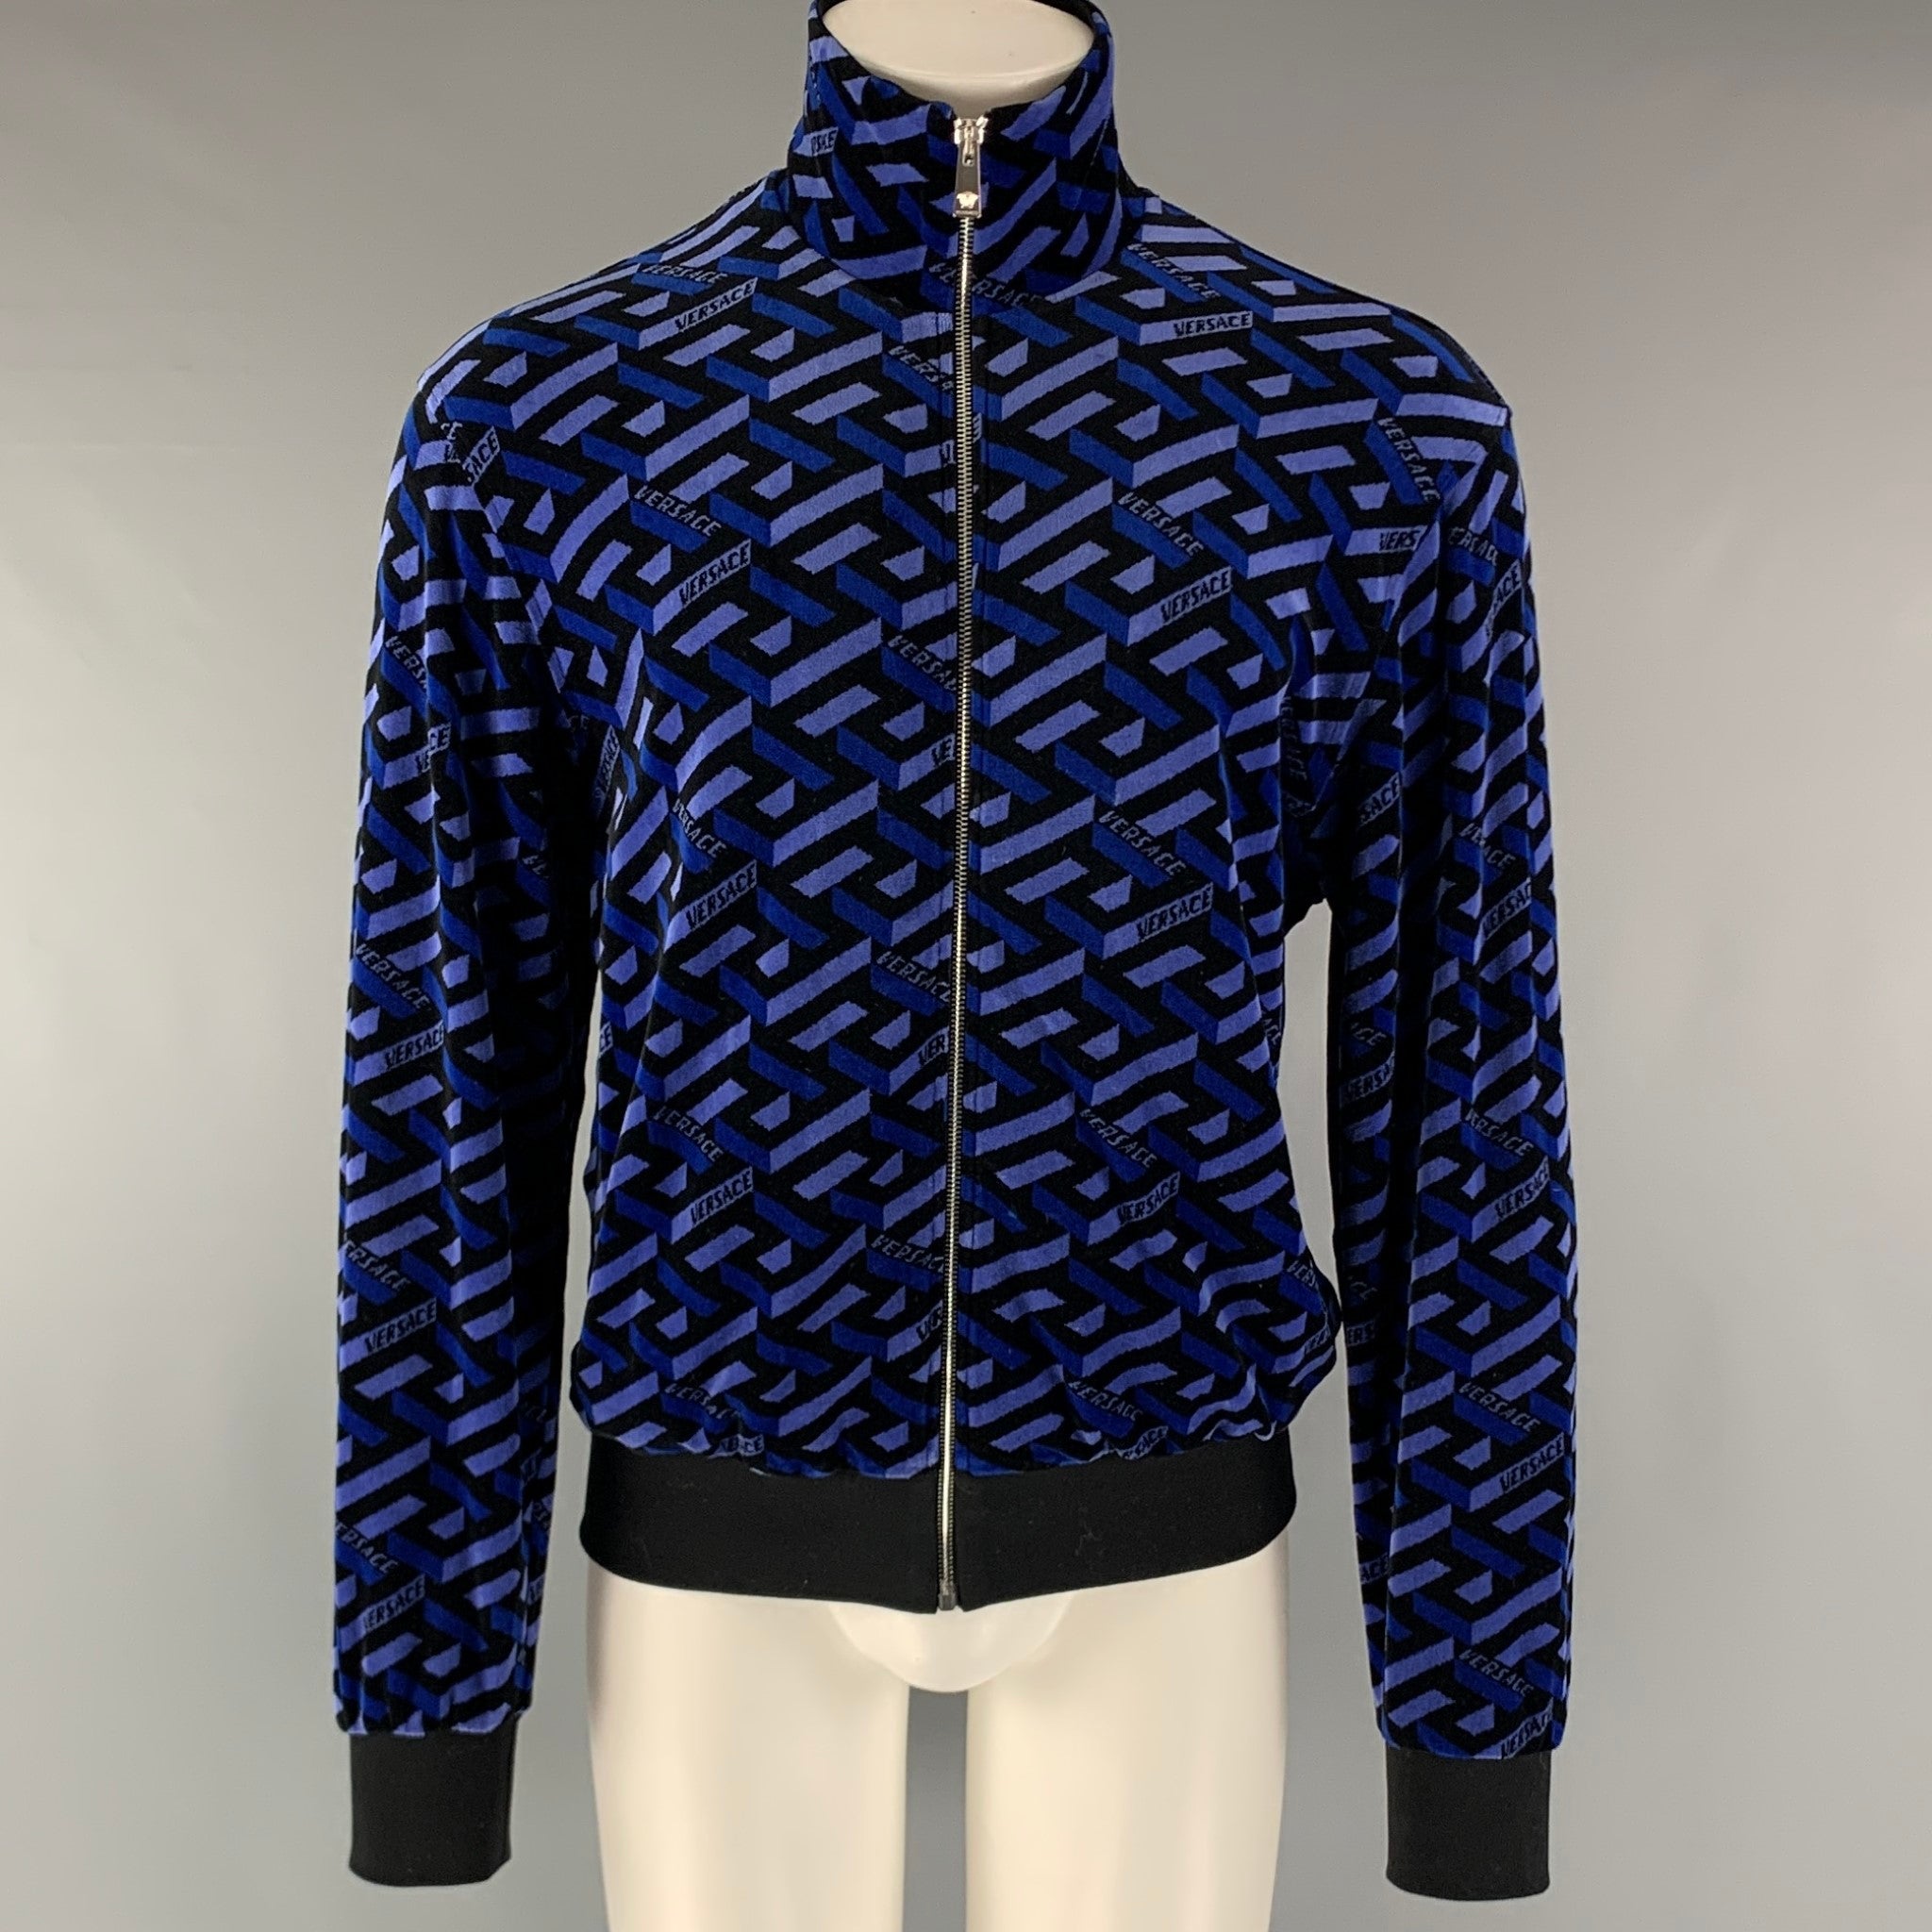 Louis Vuitton - Authenticated Jacket - Cotton Blue for Women, Very Good Condition